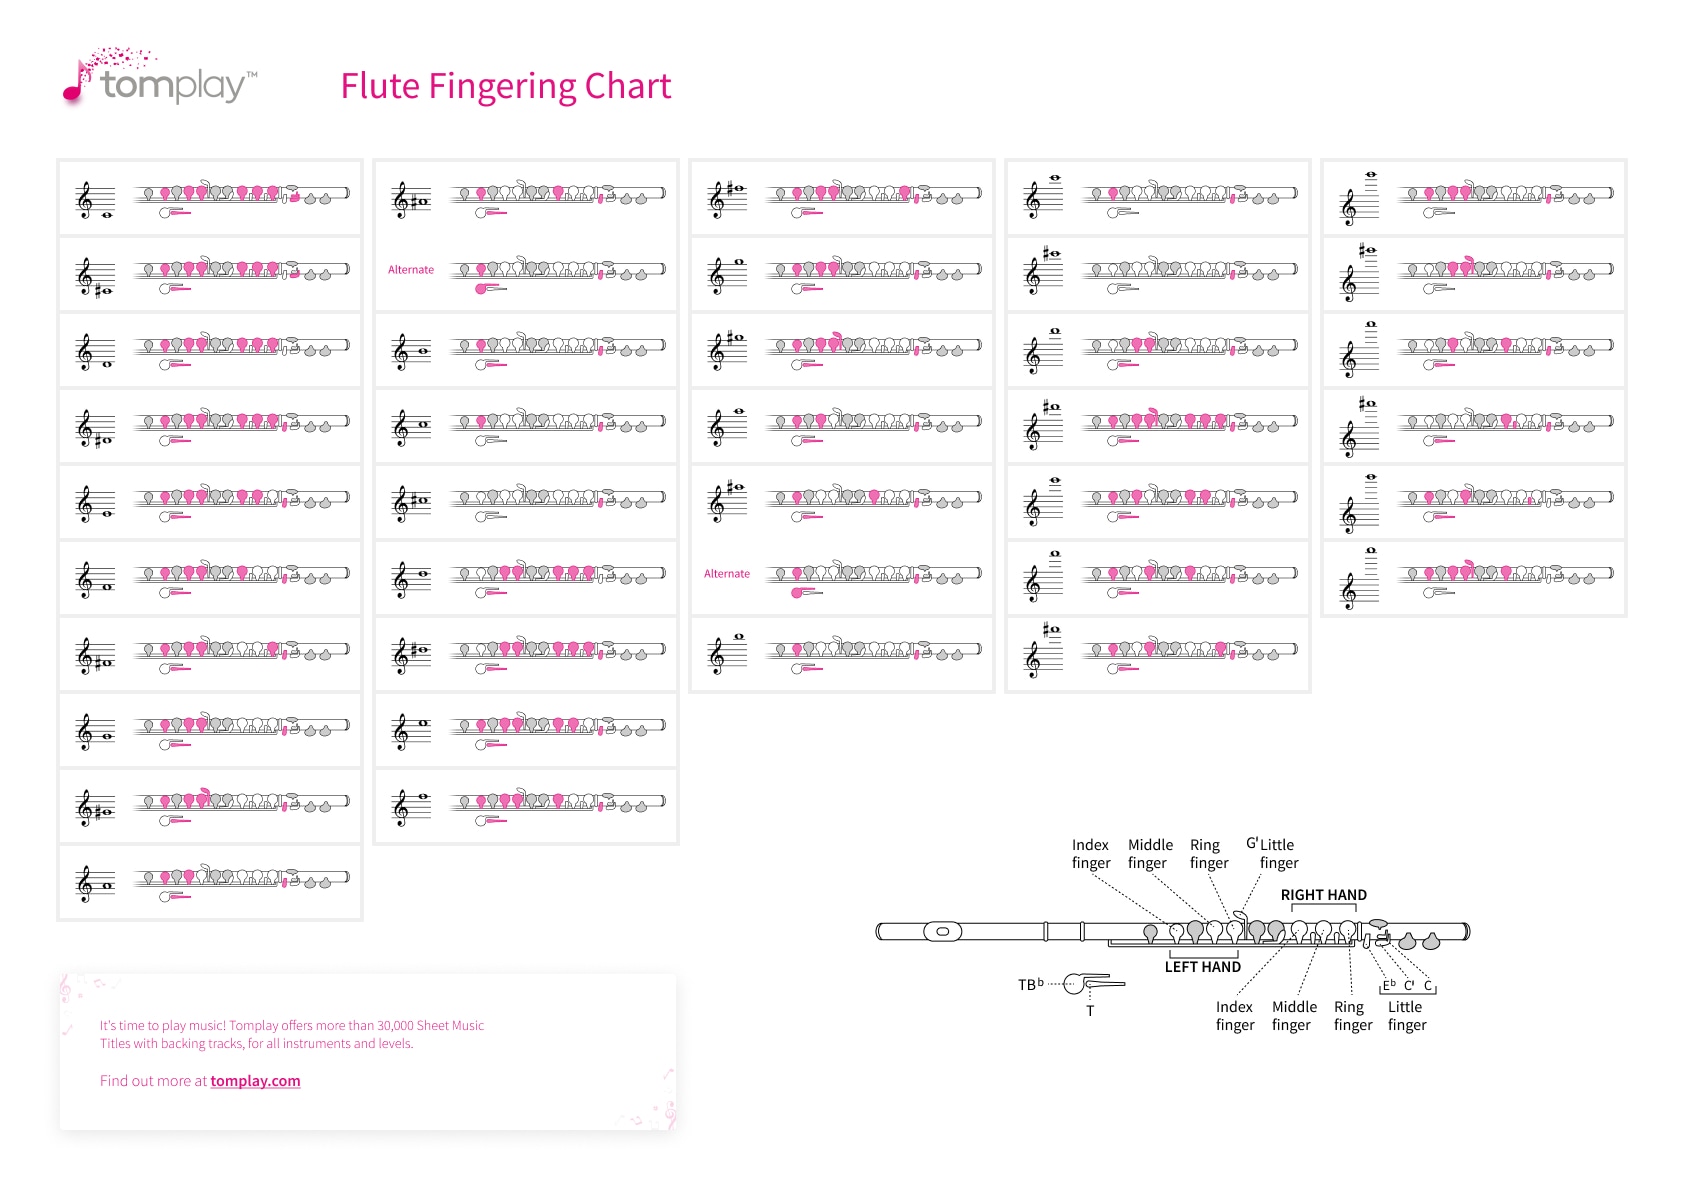 Flute fingering chart Interactive tool for all flute players